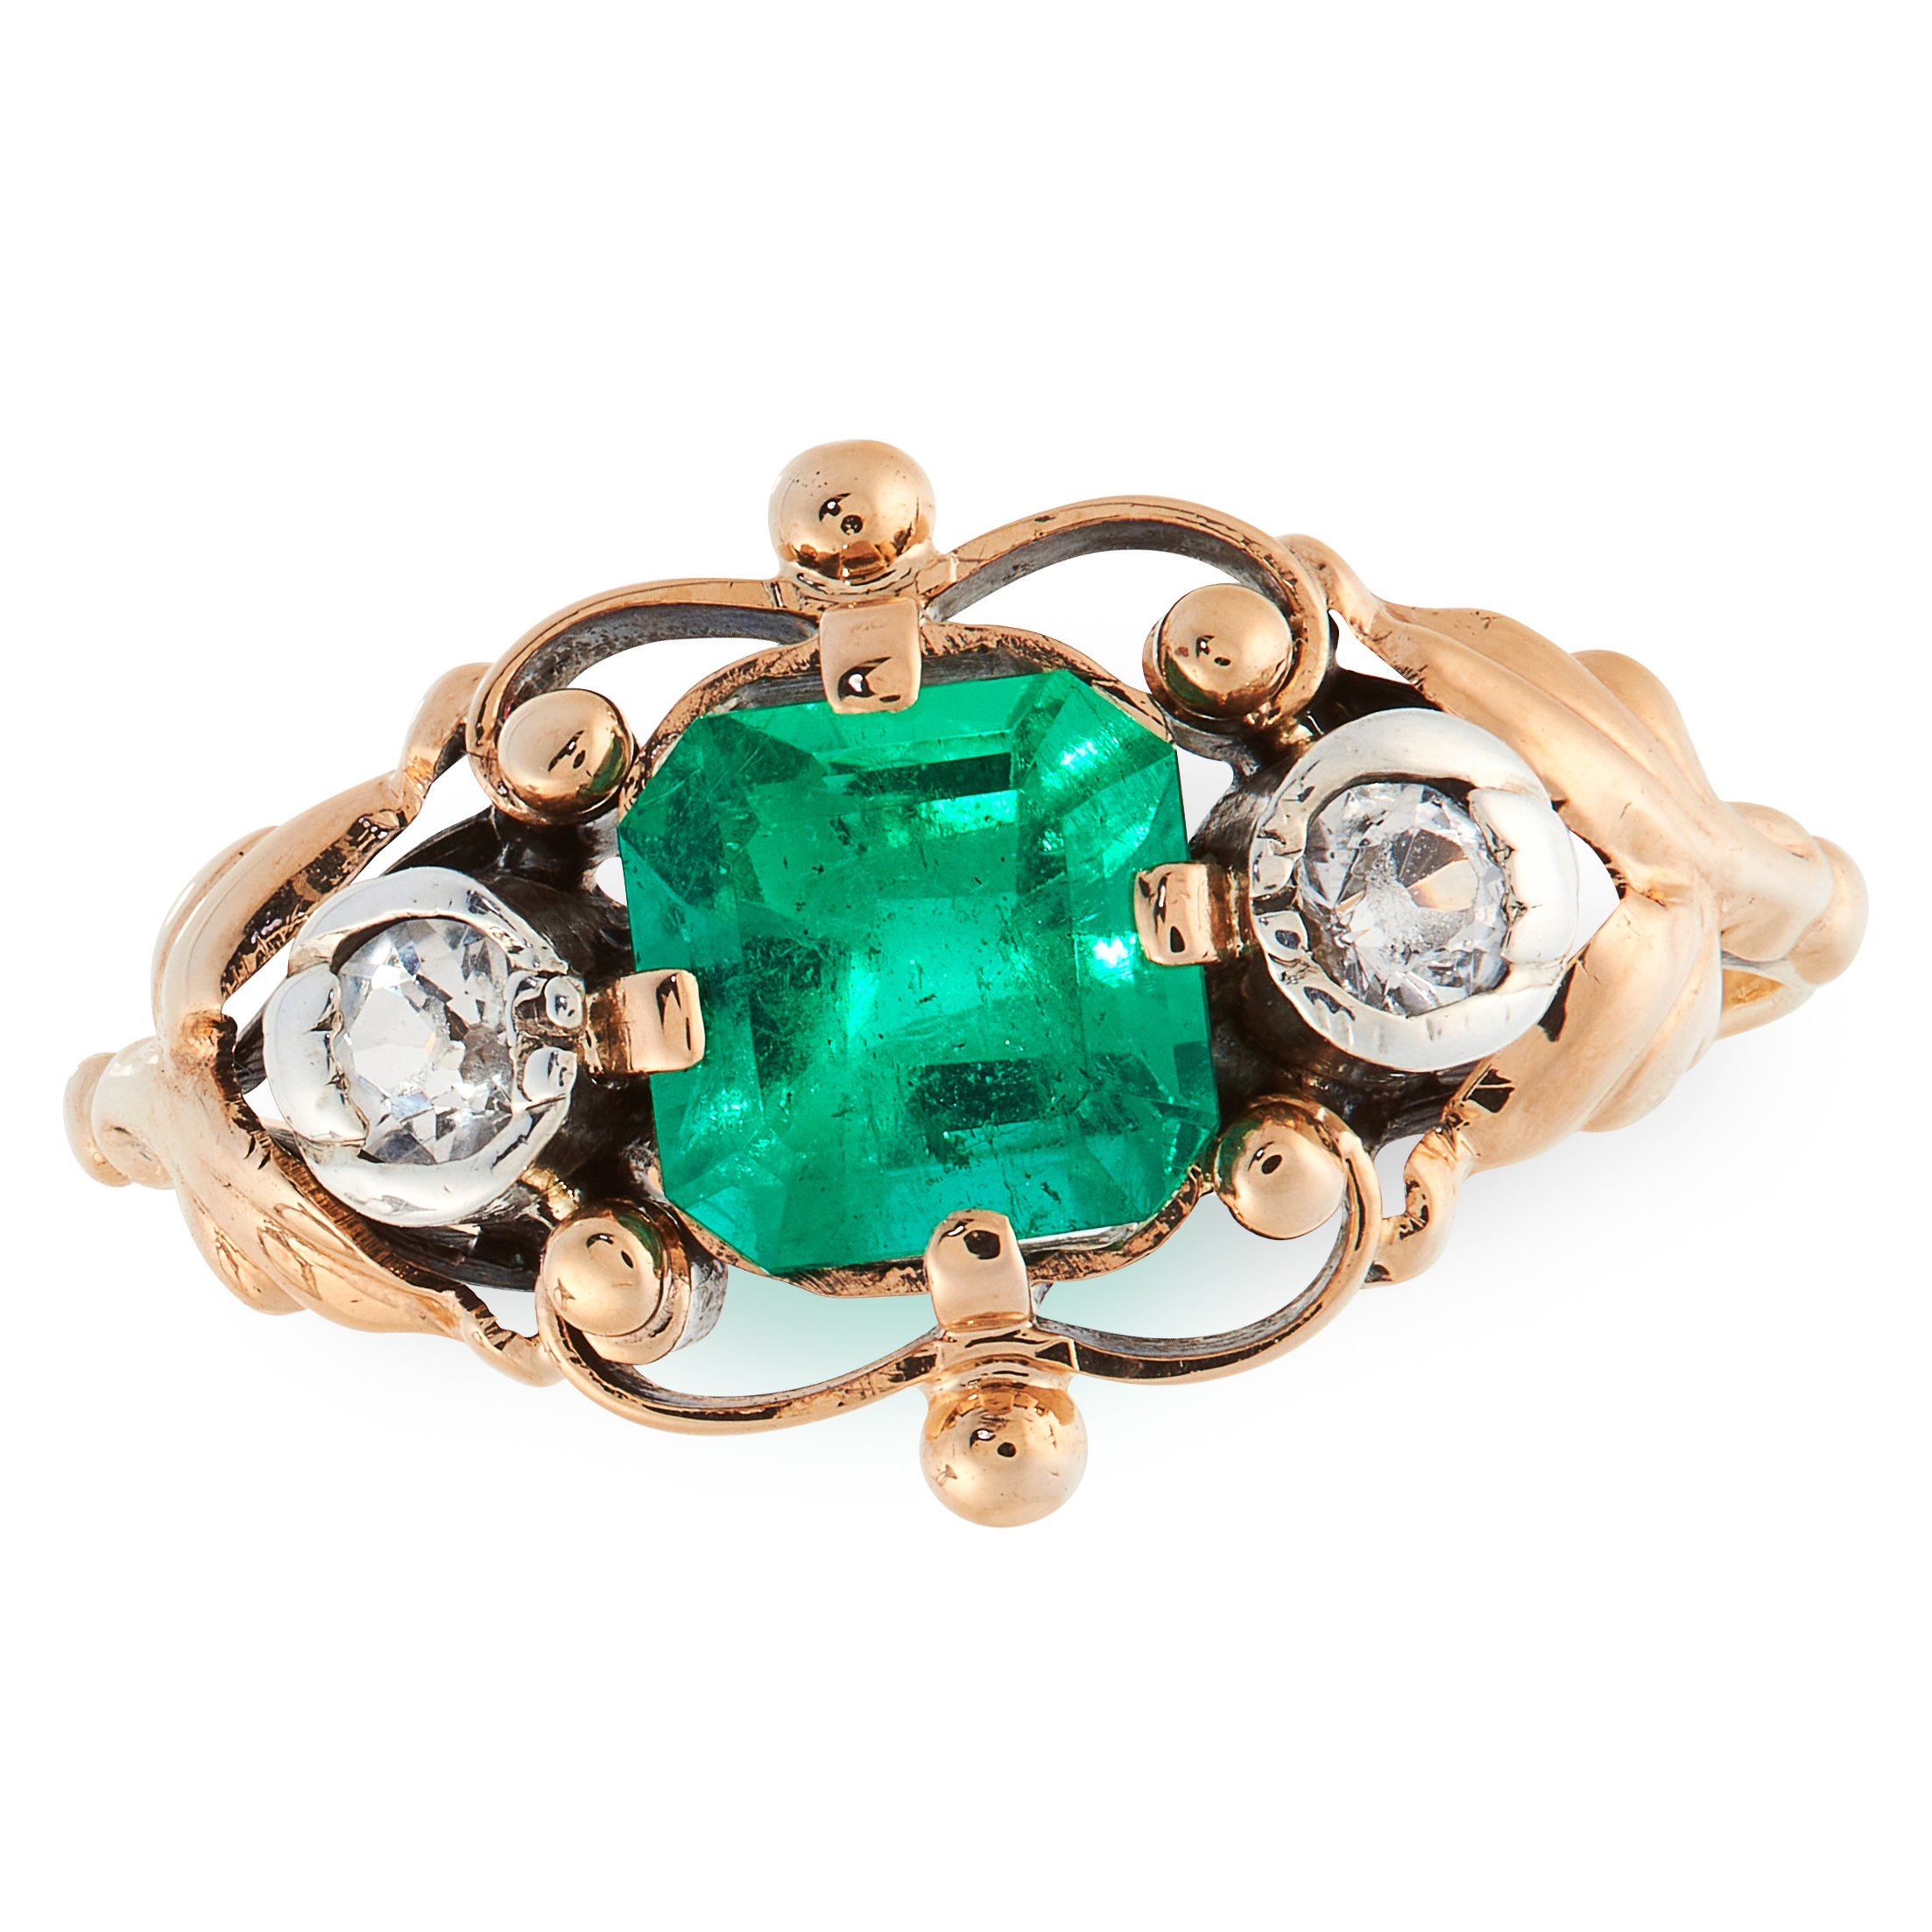 A COLOMBIAN EMERALD AND DIAMOND RING, CIRCA 1945 in 18ct yellow gold, set with an octagonal cut